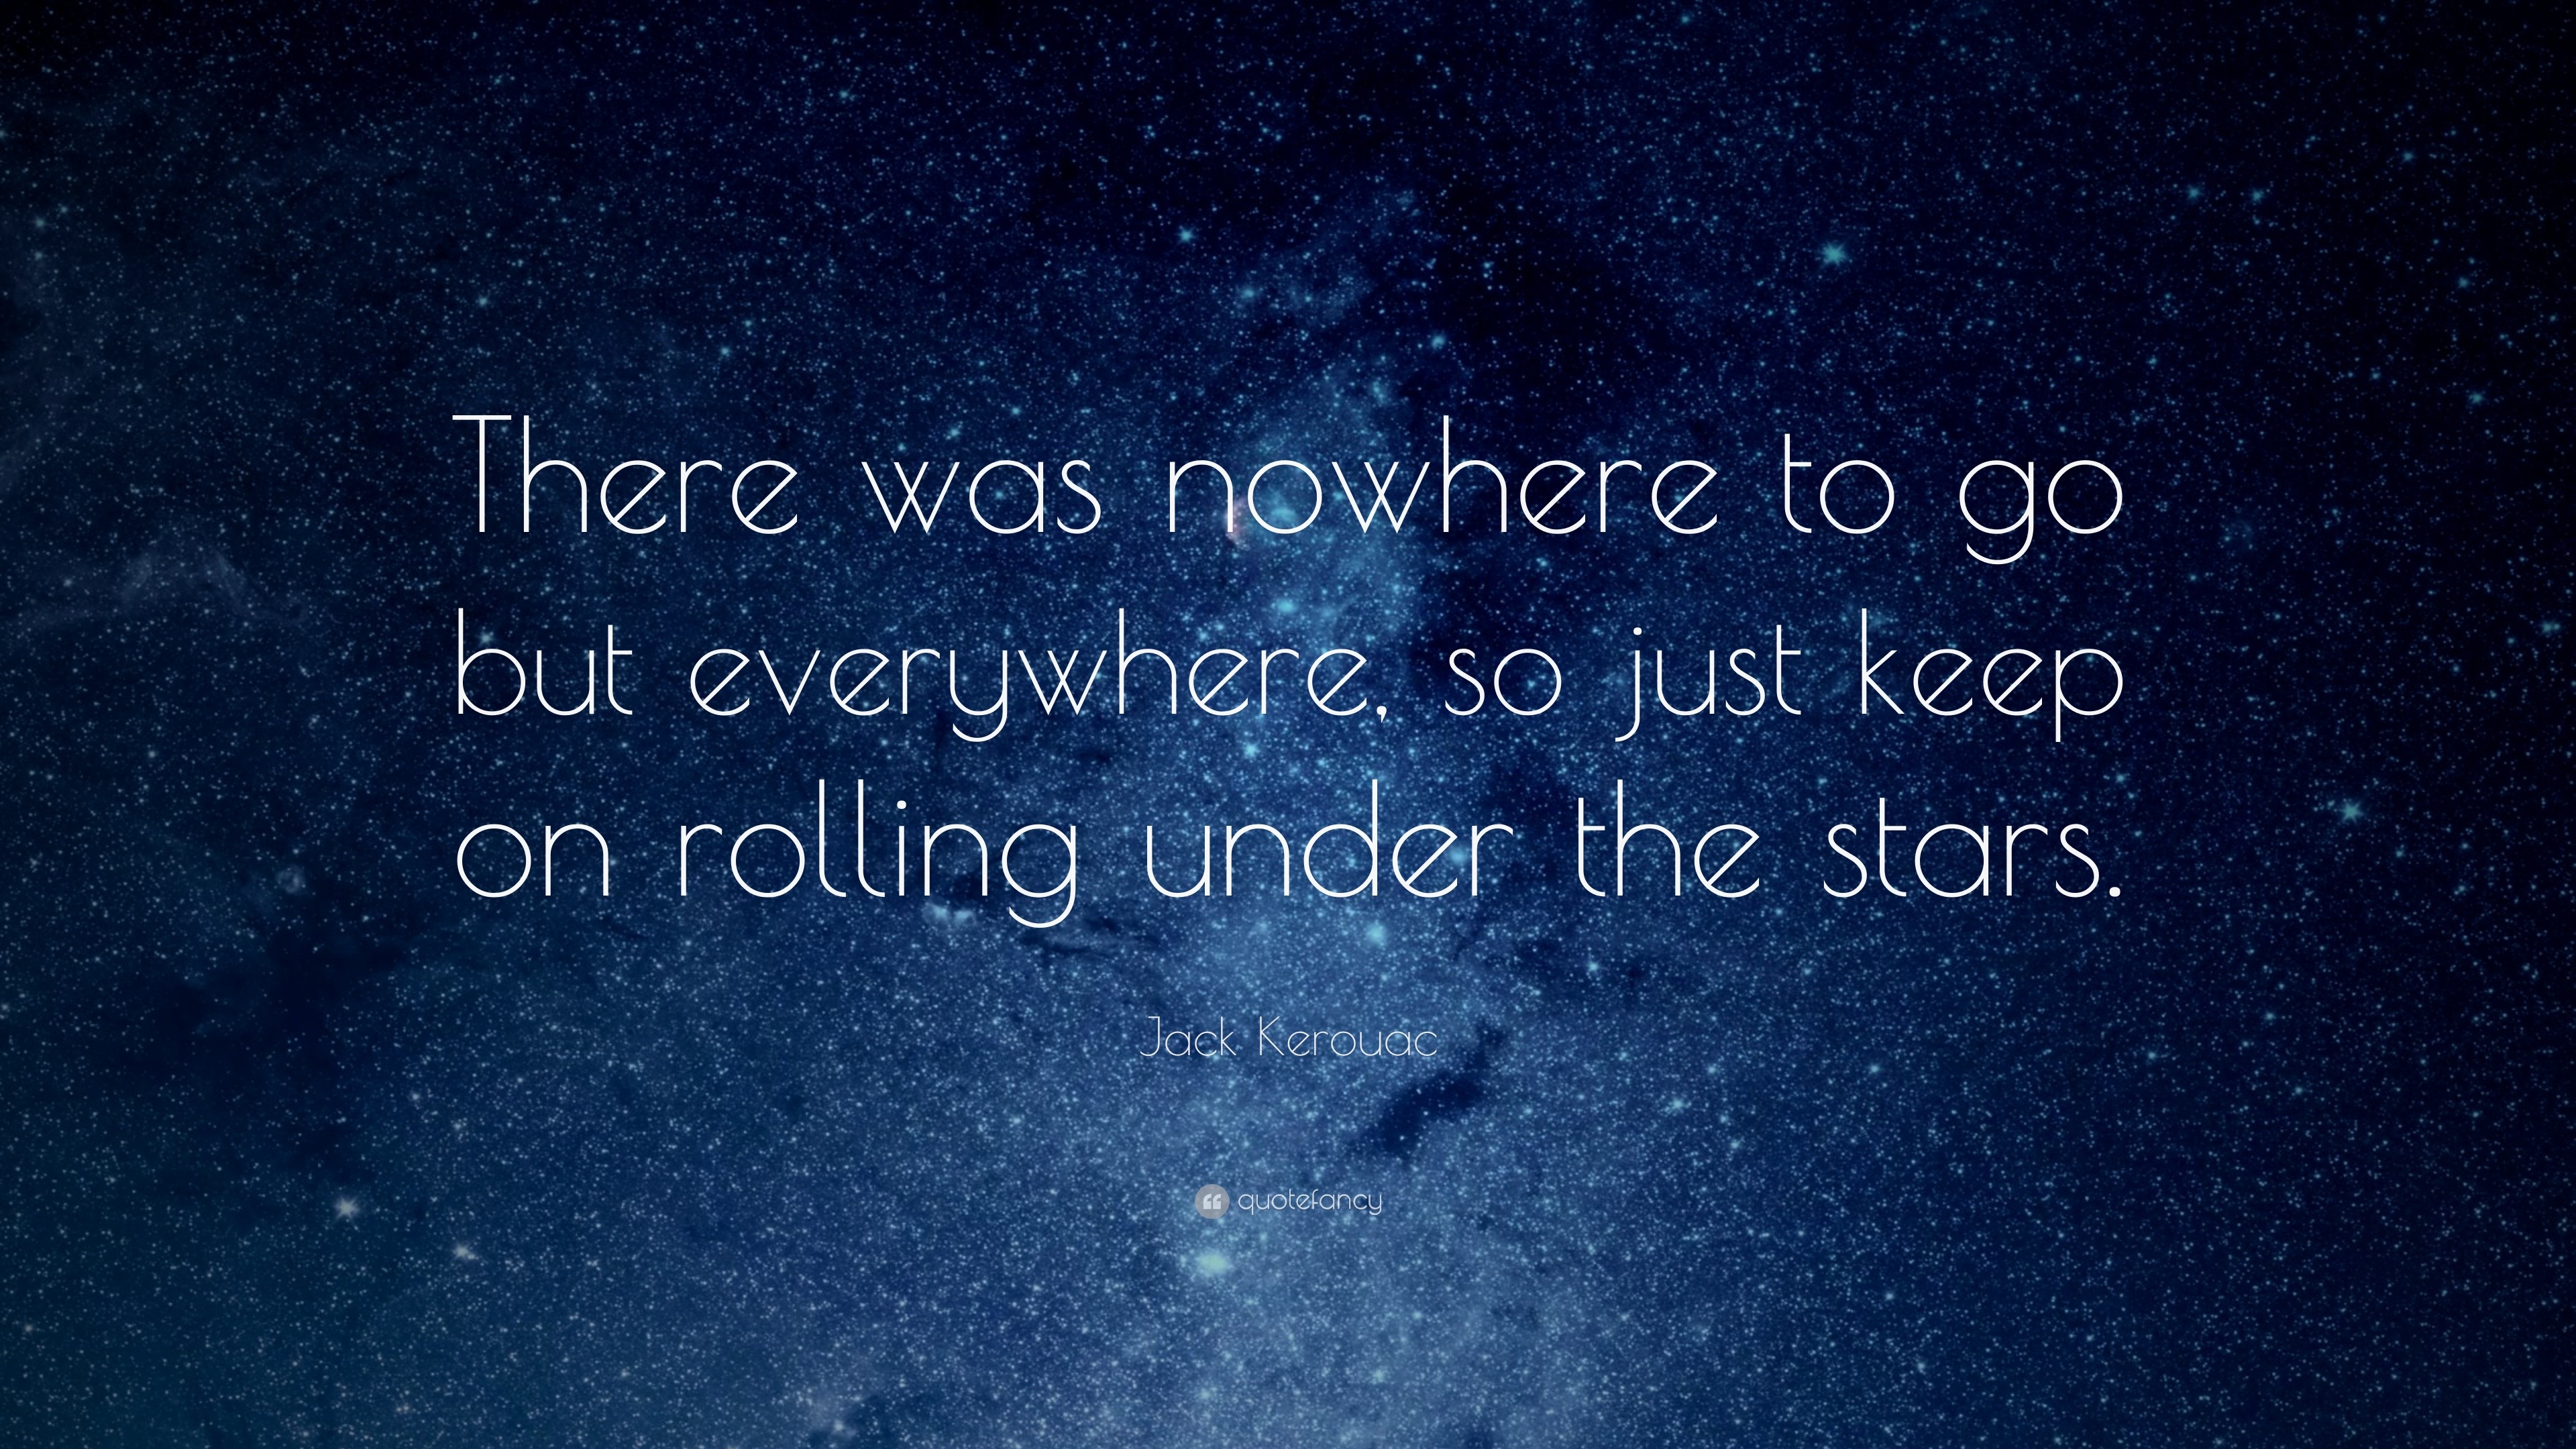 Jack Kerouac Quote: “There was nowhere to go but everywhere, so just ...